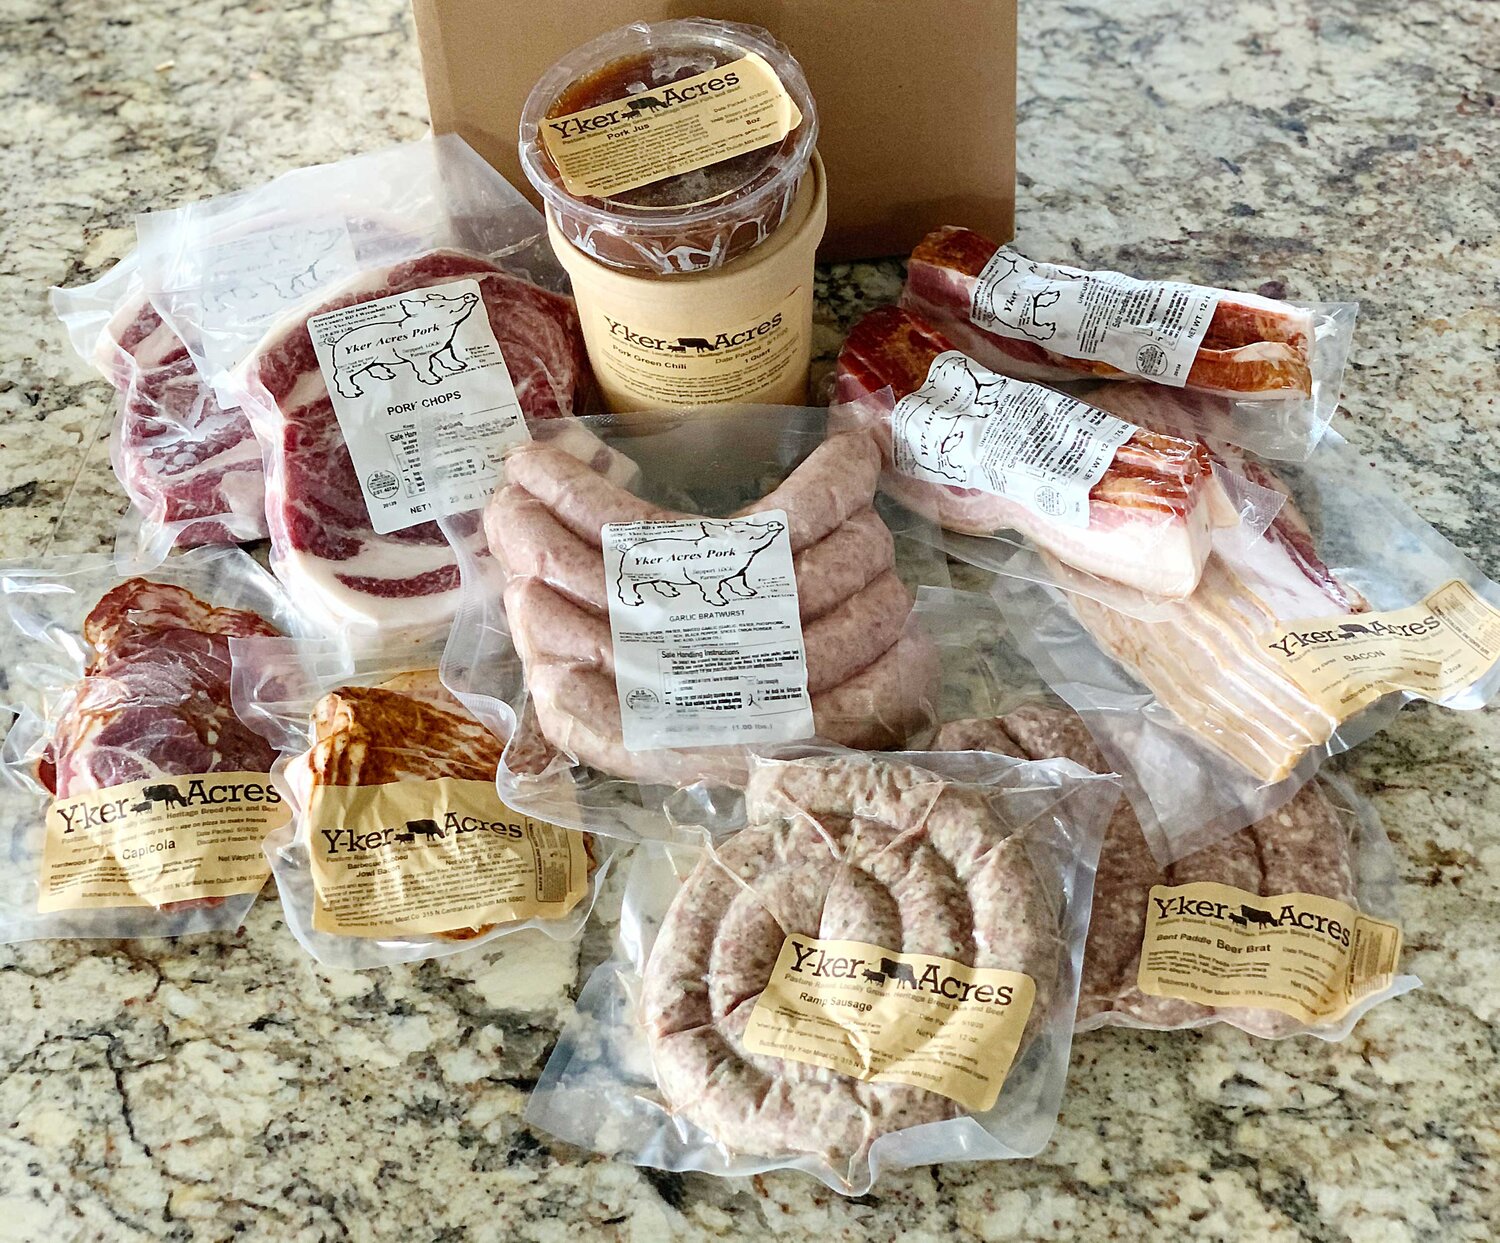 Monthly Meat Box Subscription